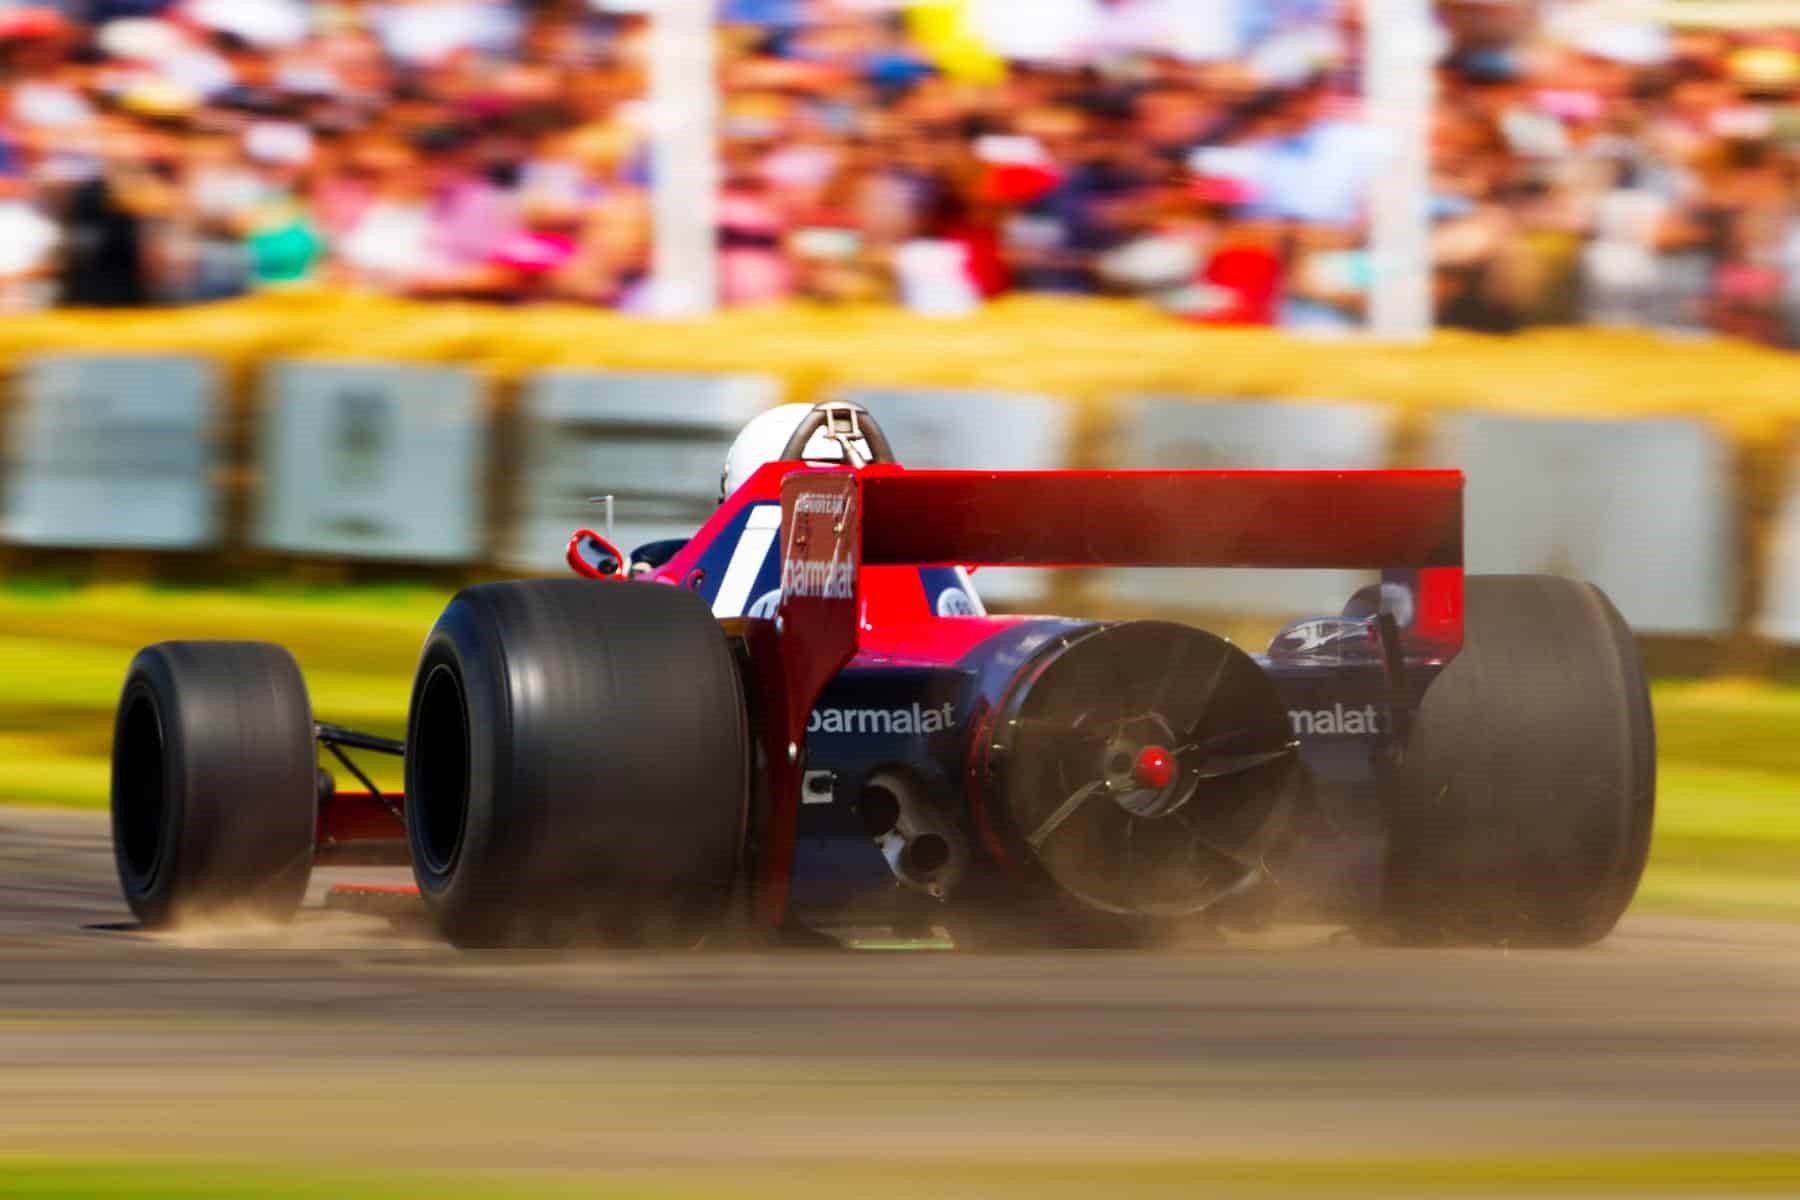 The sole surviving BT46B sucking up the dust at the Goodwood Festival of Speed.